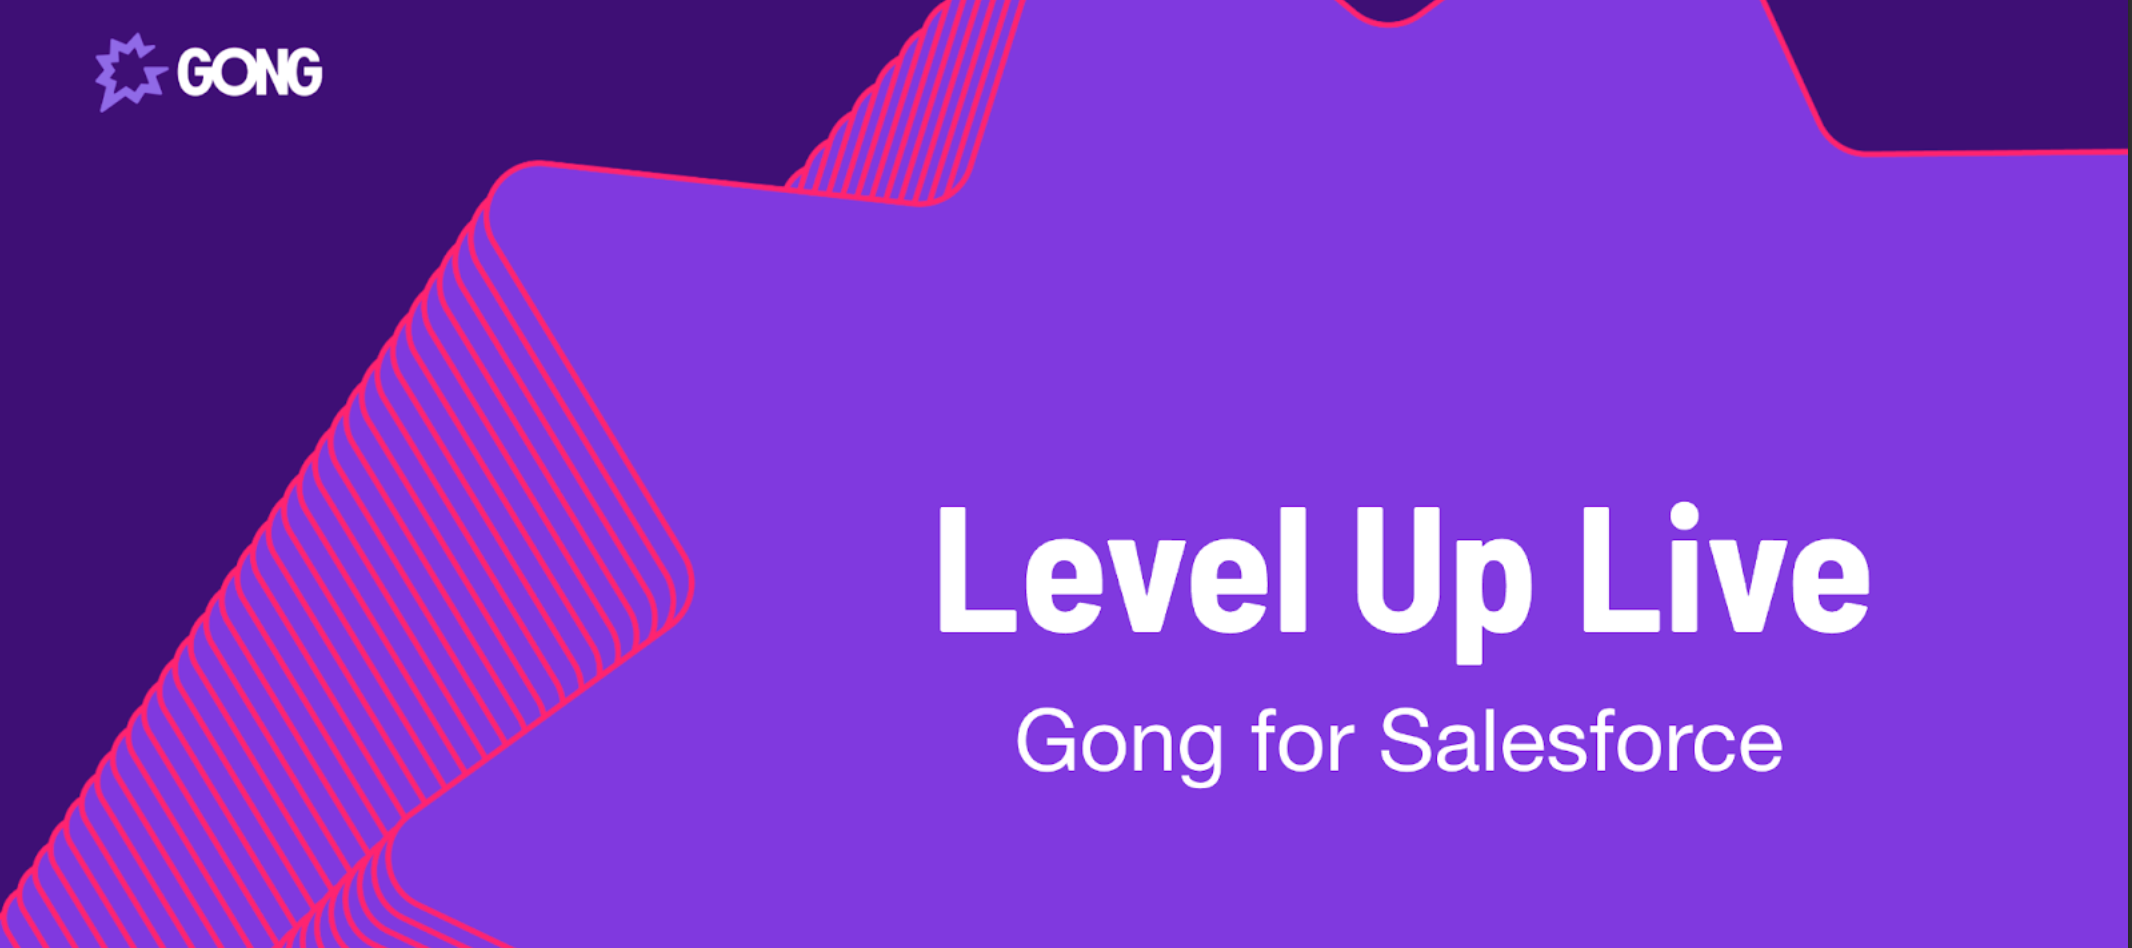 Gong for Salesforce - Level Up Live Recap